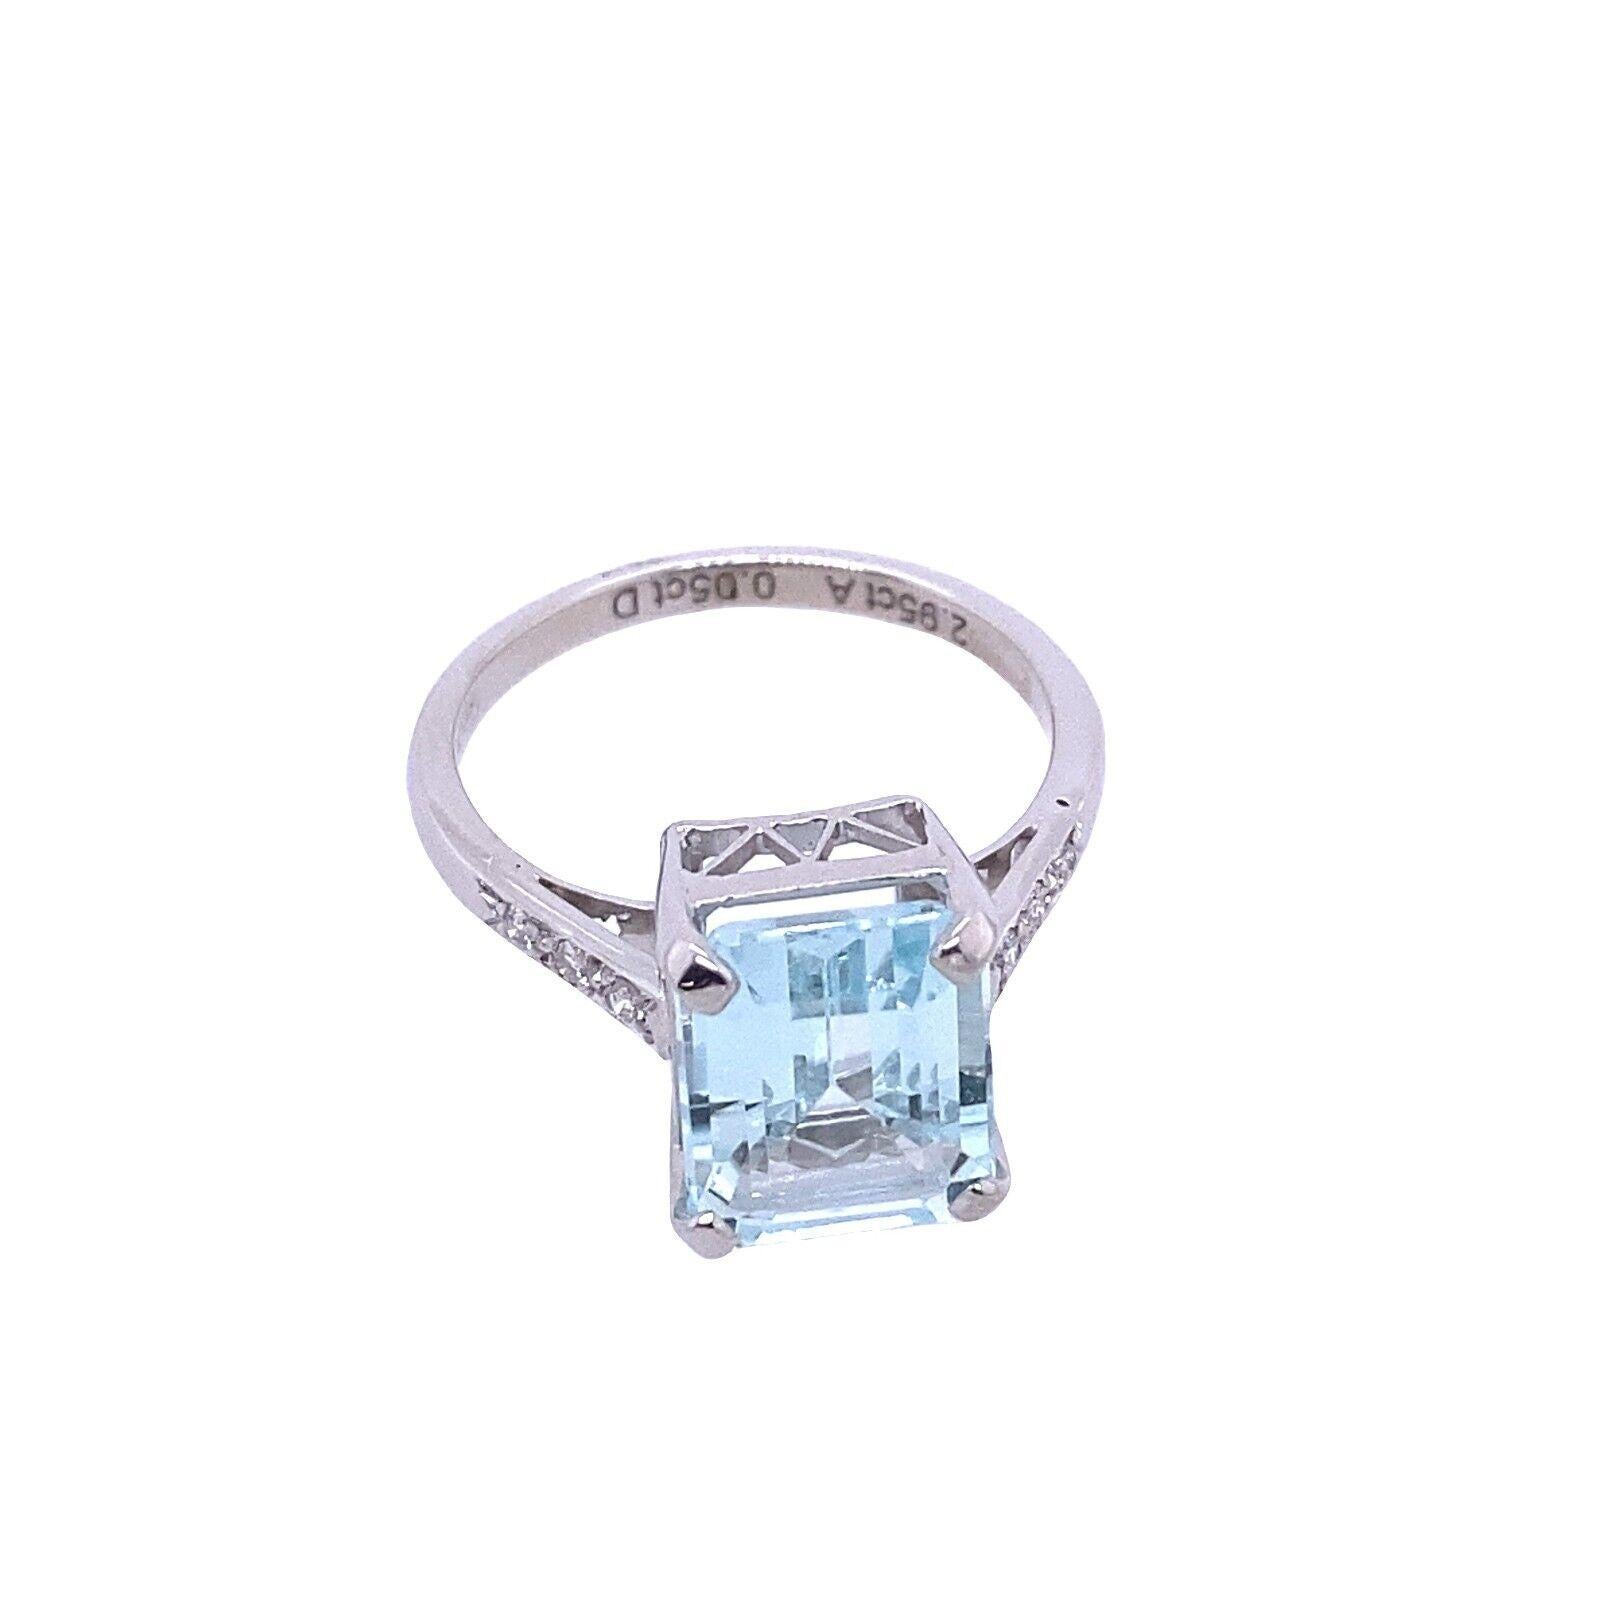 The aquamarine is the birthstone for March. This beautiful ring features a 2.95ct emerald cut aquamarine, set in a 18ct white gold band. The ring is decorated with 3 round brilliant diamonds on each shoulder.

Additional Information: 
Total Diamond